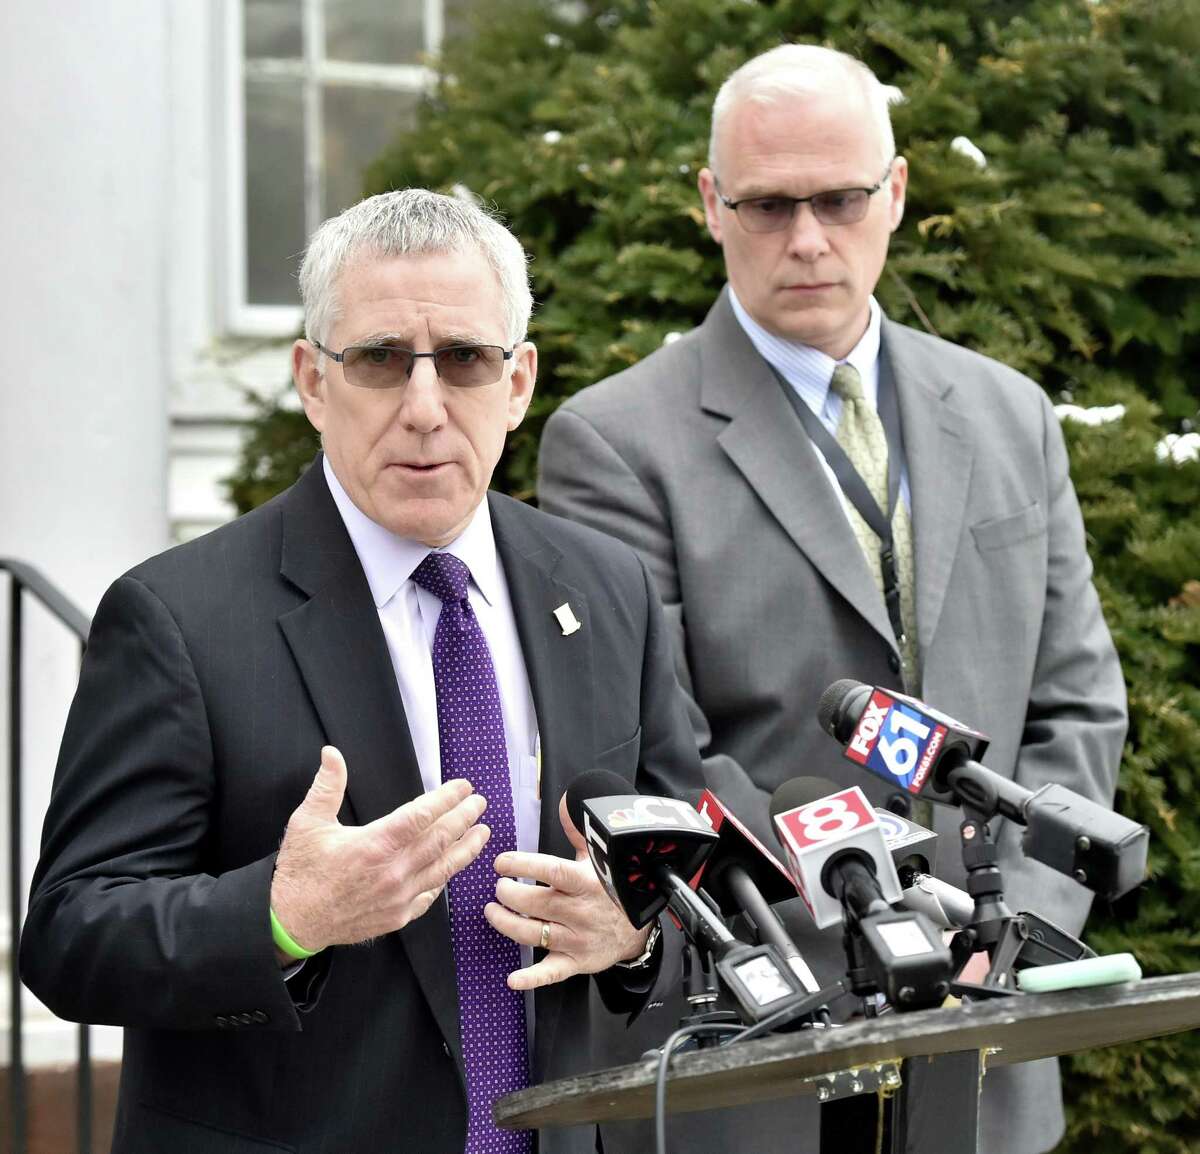 Guilford, Connecticut - Thursday, January 1, 2018: Guilford First Selectman Matthew T. Hoey, III, left, and Guilford Superintendent of Schools Paul Freeman hold a press conference Thursday morning in front of the superintendent's office sharing information on the shooting death of a 15-year-old boy at 104 Seaside Avenue in Guilford Wednesday night. The boy was freshman at Guilford High School. He died Wednesday afternoon after sustaining a gunshot wound. When police arrived after getting a call at 3:25 p.m., they found two children, one of whom had been shot, according to Guilford Police.